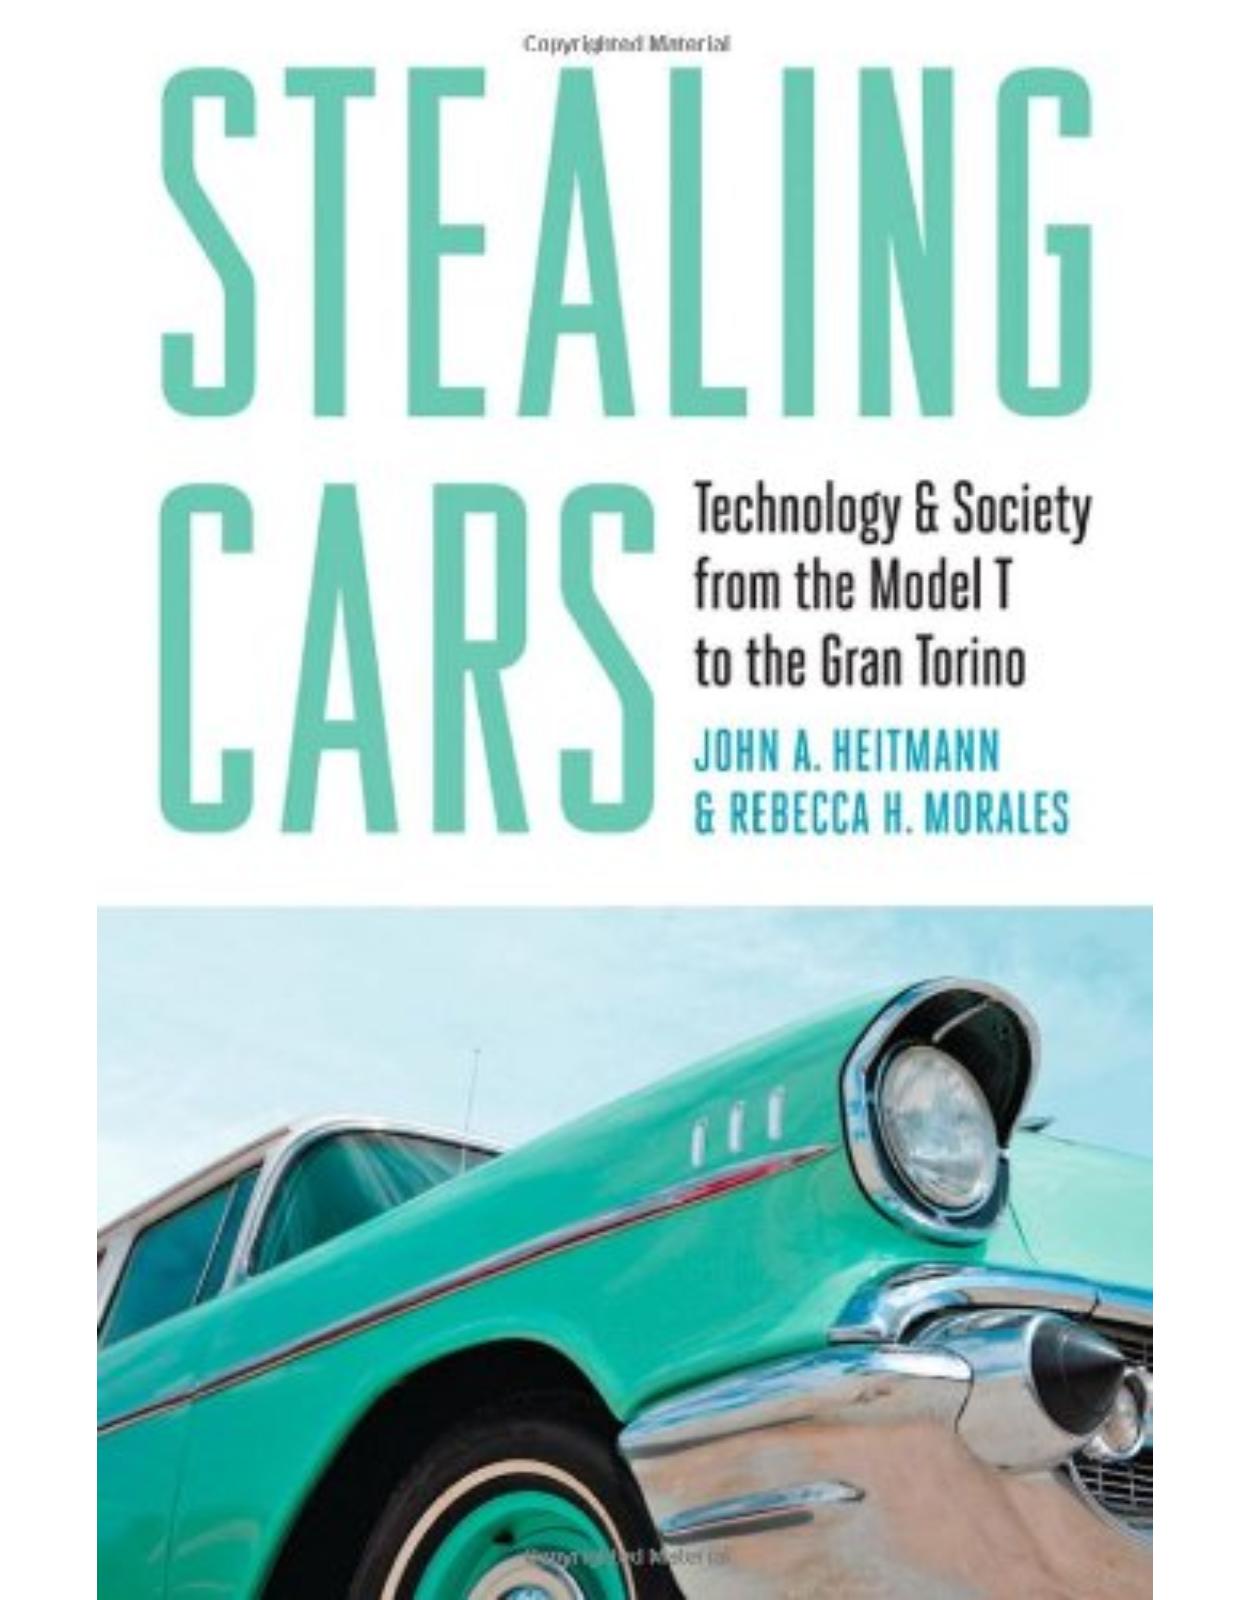 Stealing Cars, Technology and Society from the Model T to the Gran Torino